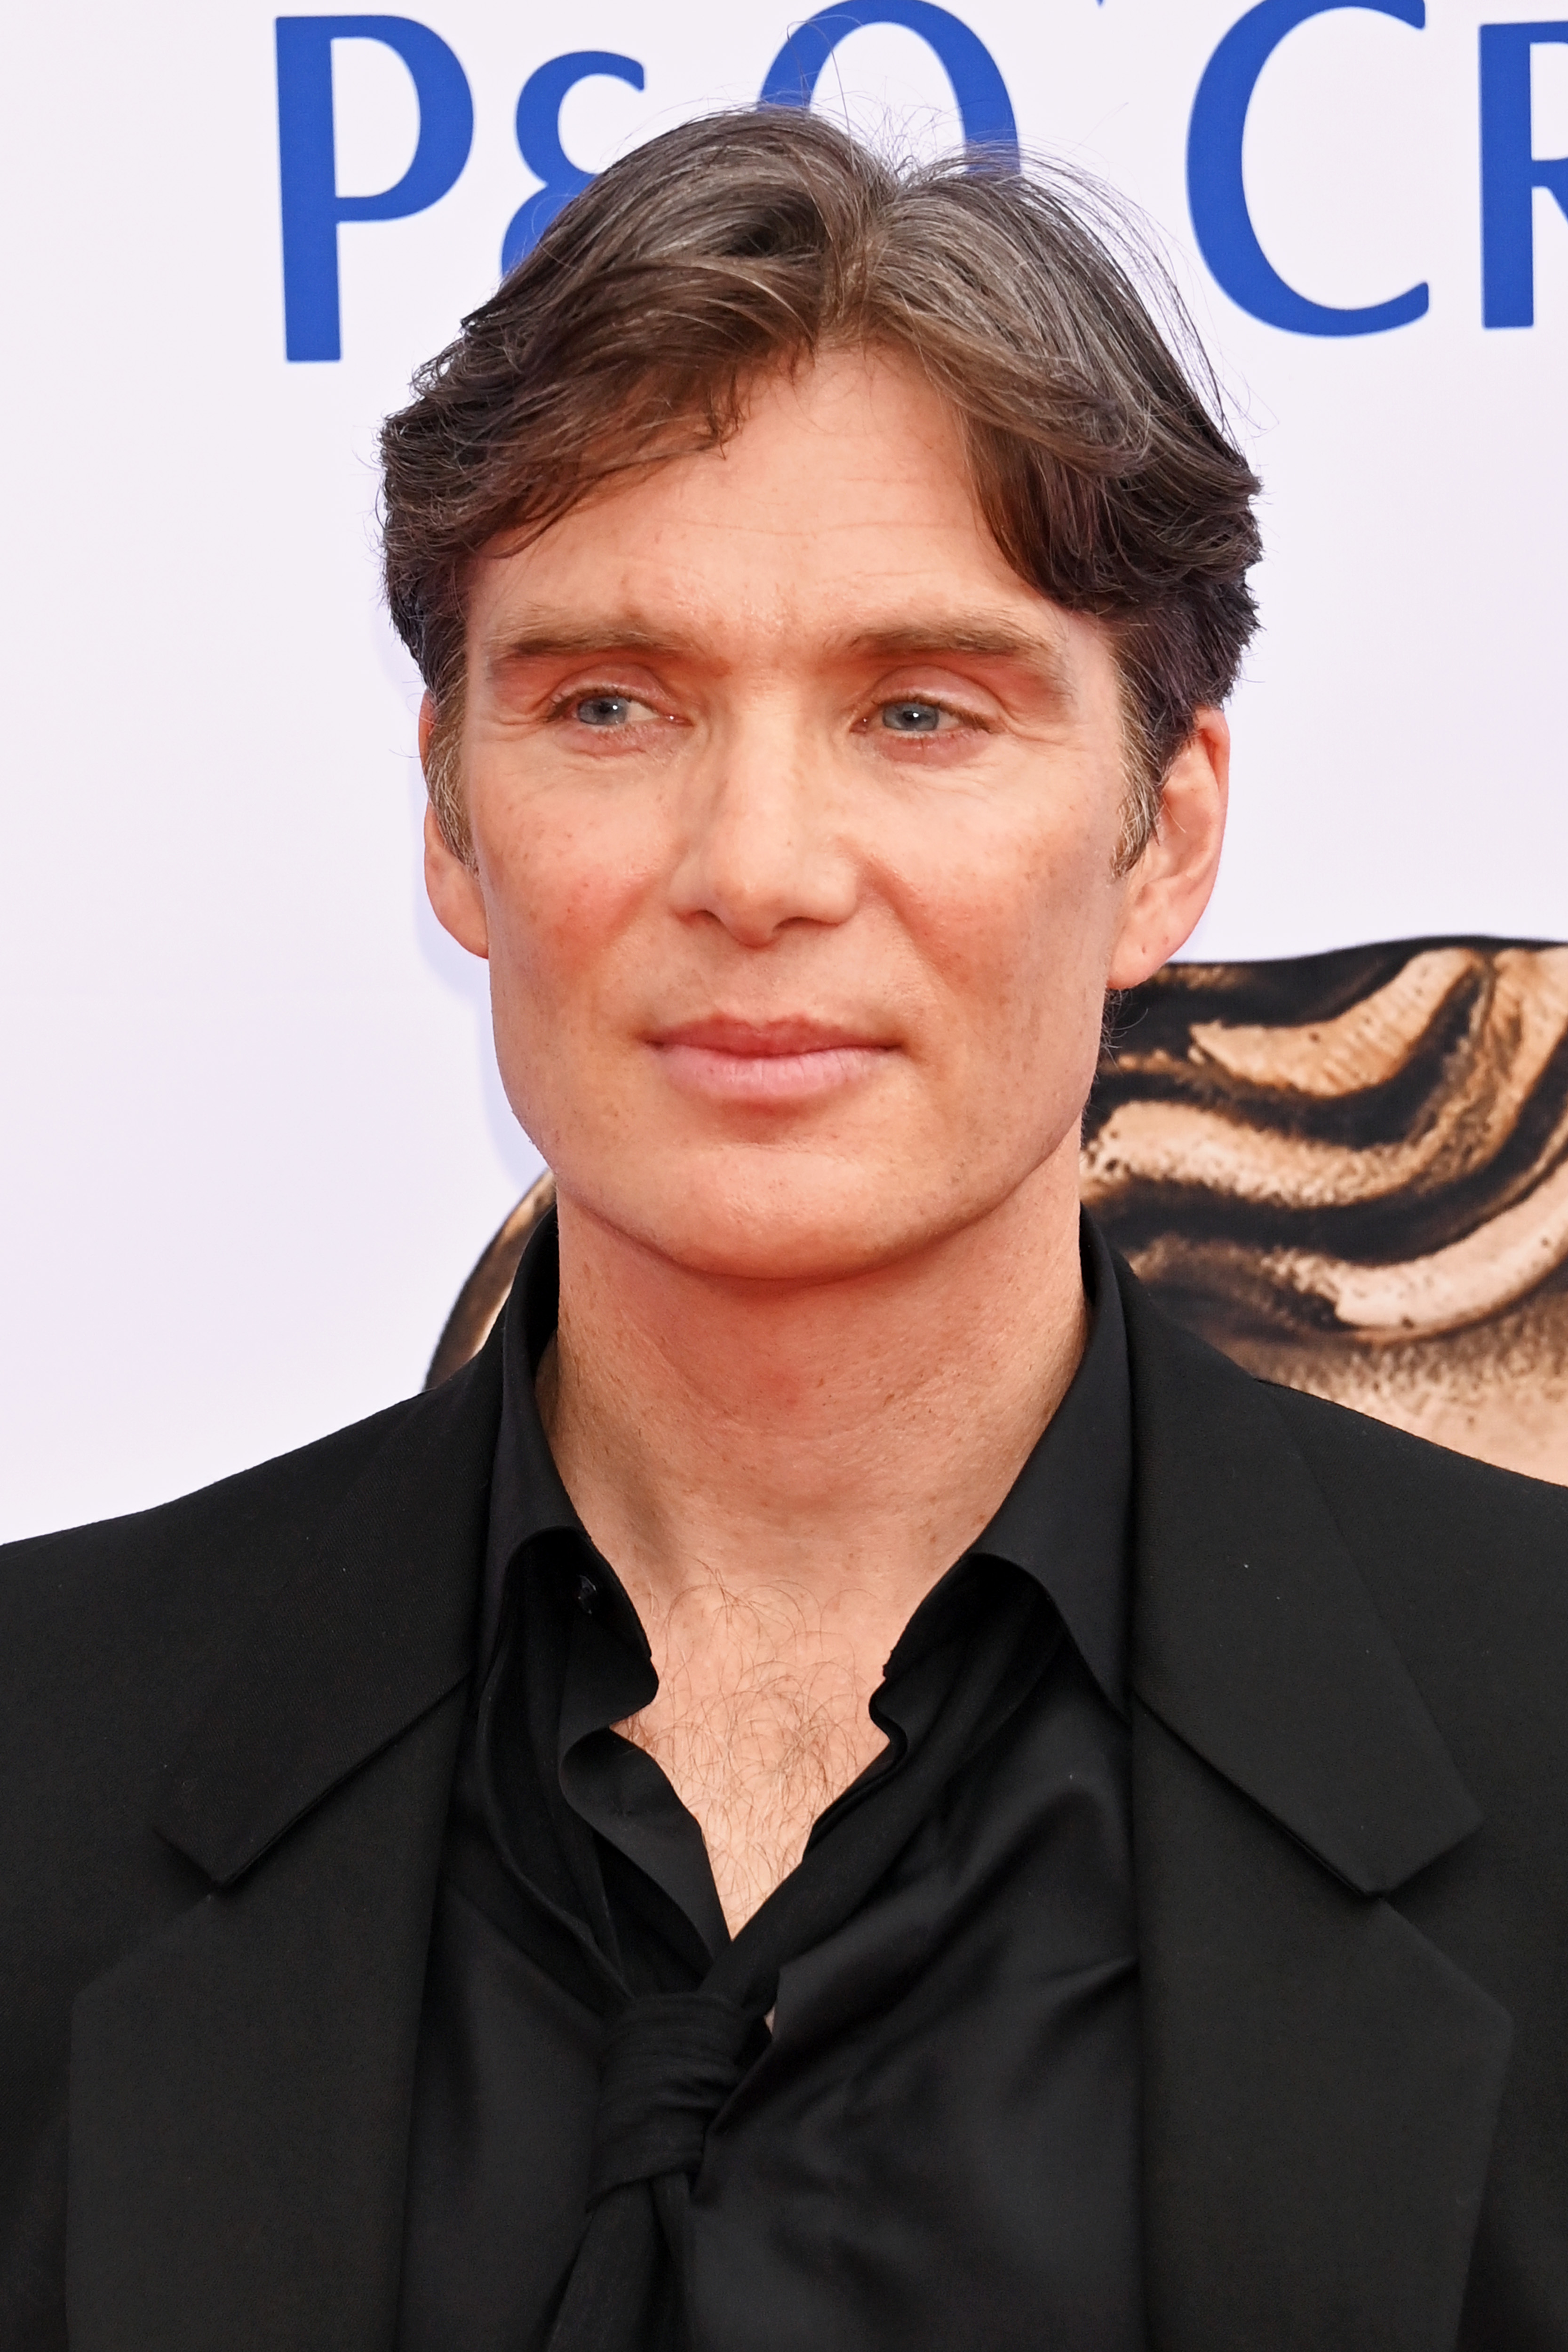 Cillian Murphy besucht die BAFTA Television Awards mit P&O Cruises in der Royal Festival Hall in London, England, am 14. Mai 2023. | Quelle: Getty Images